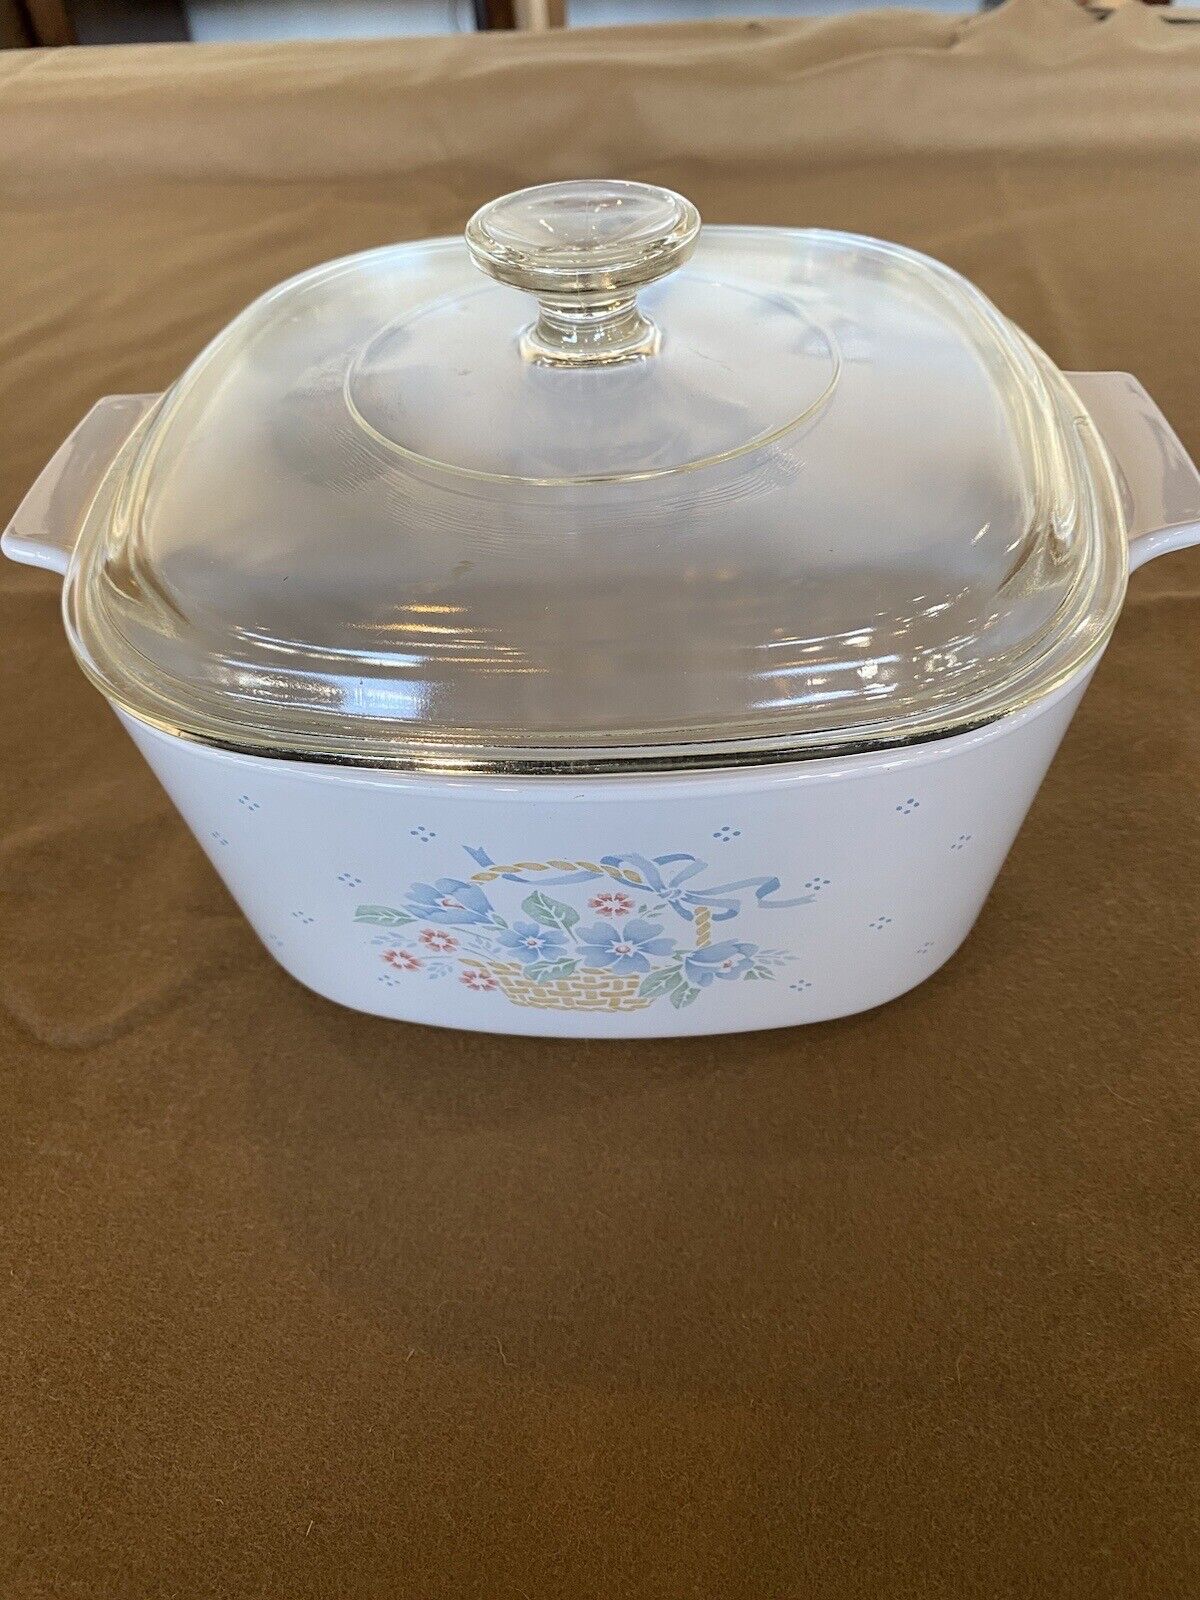 Country Cornflower 3 quart Square Casserole Dish With Lid By Corning Revere